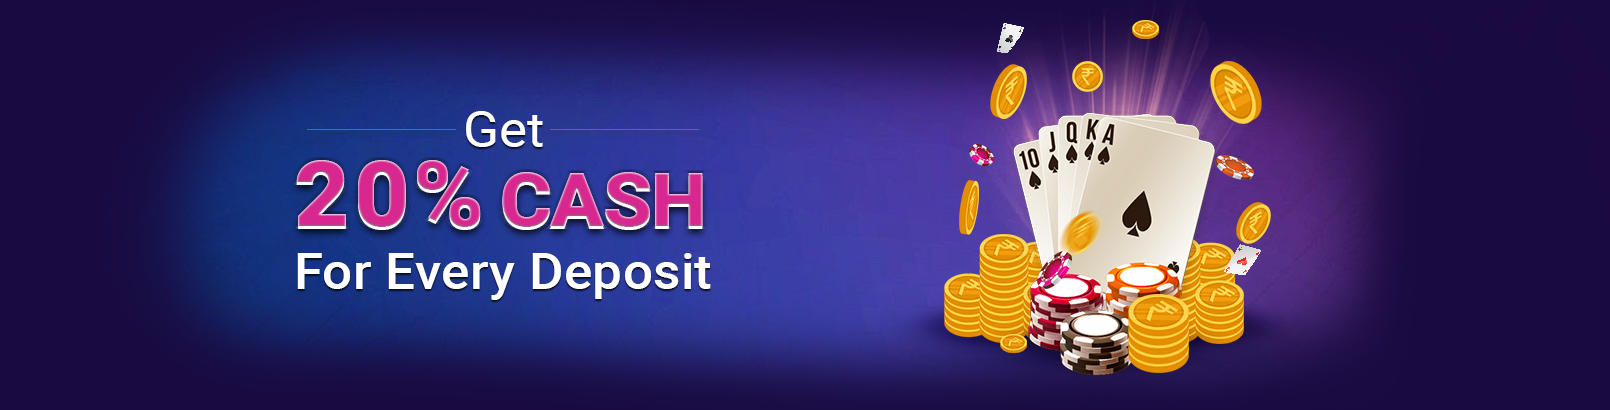 get 20% cash for every deposit